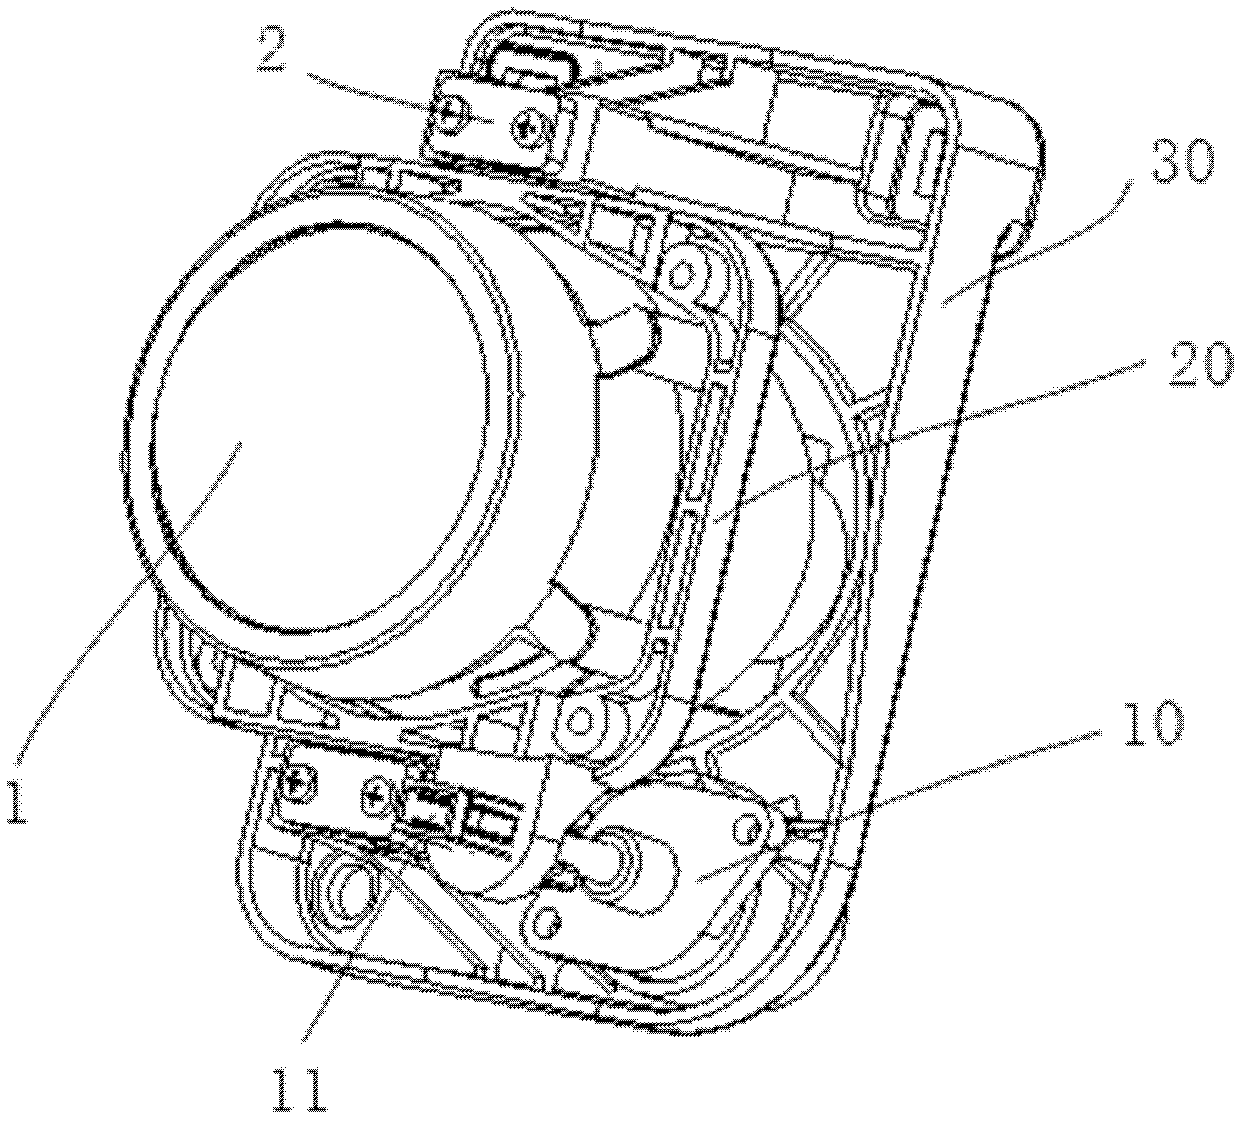 Adaptive front lighting system (AFS) horizontal angle adjustment actuating mechanism